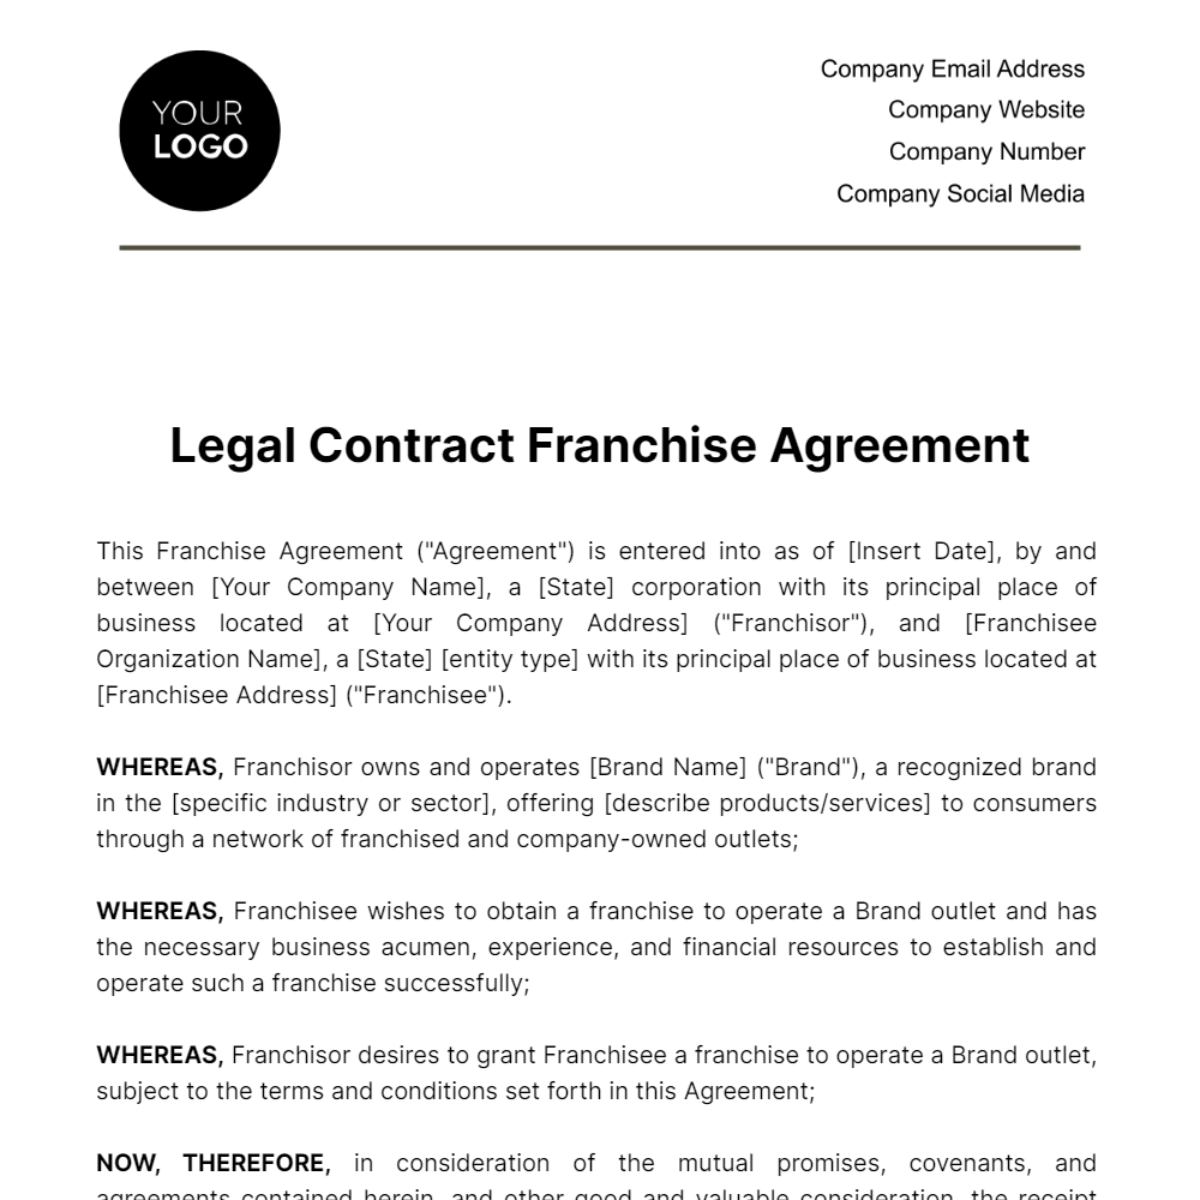 Free Legal Contract Franchise Agreement Template